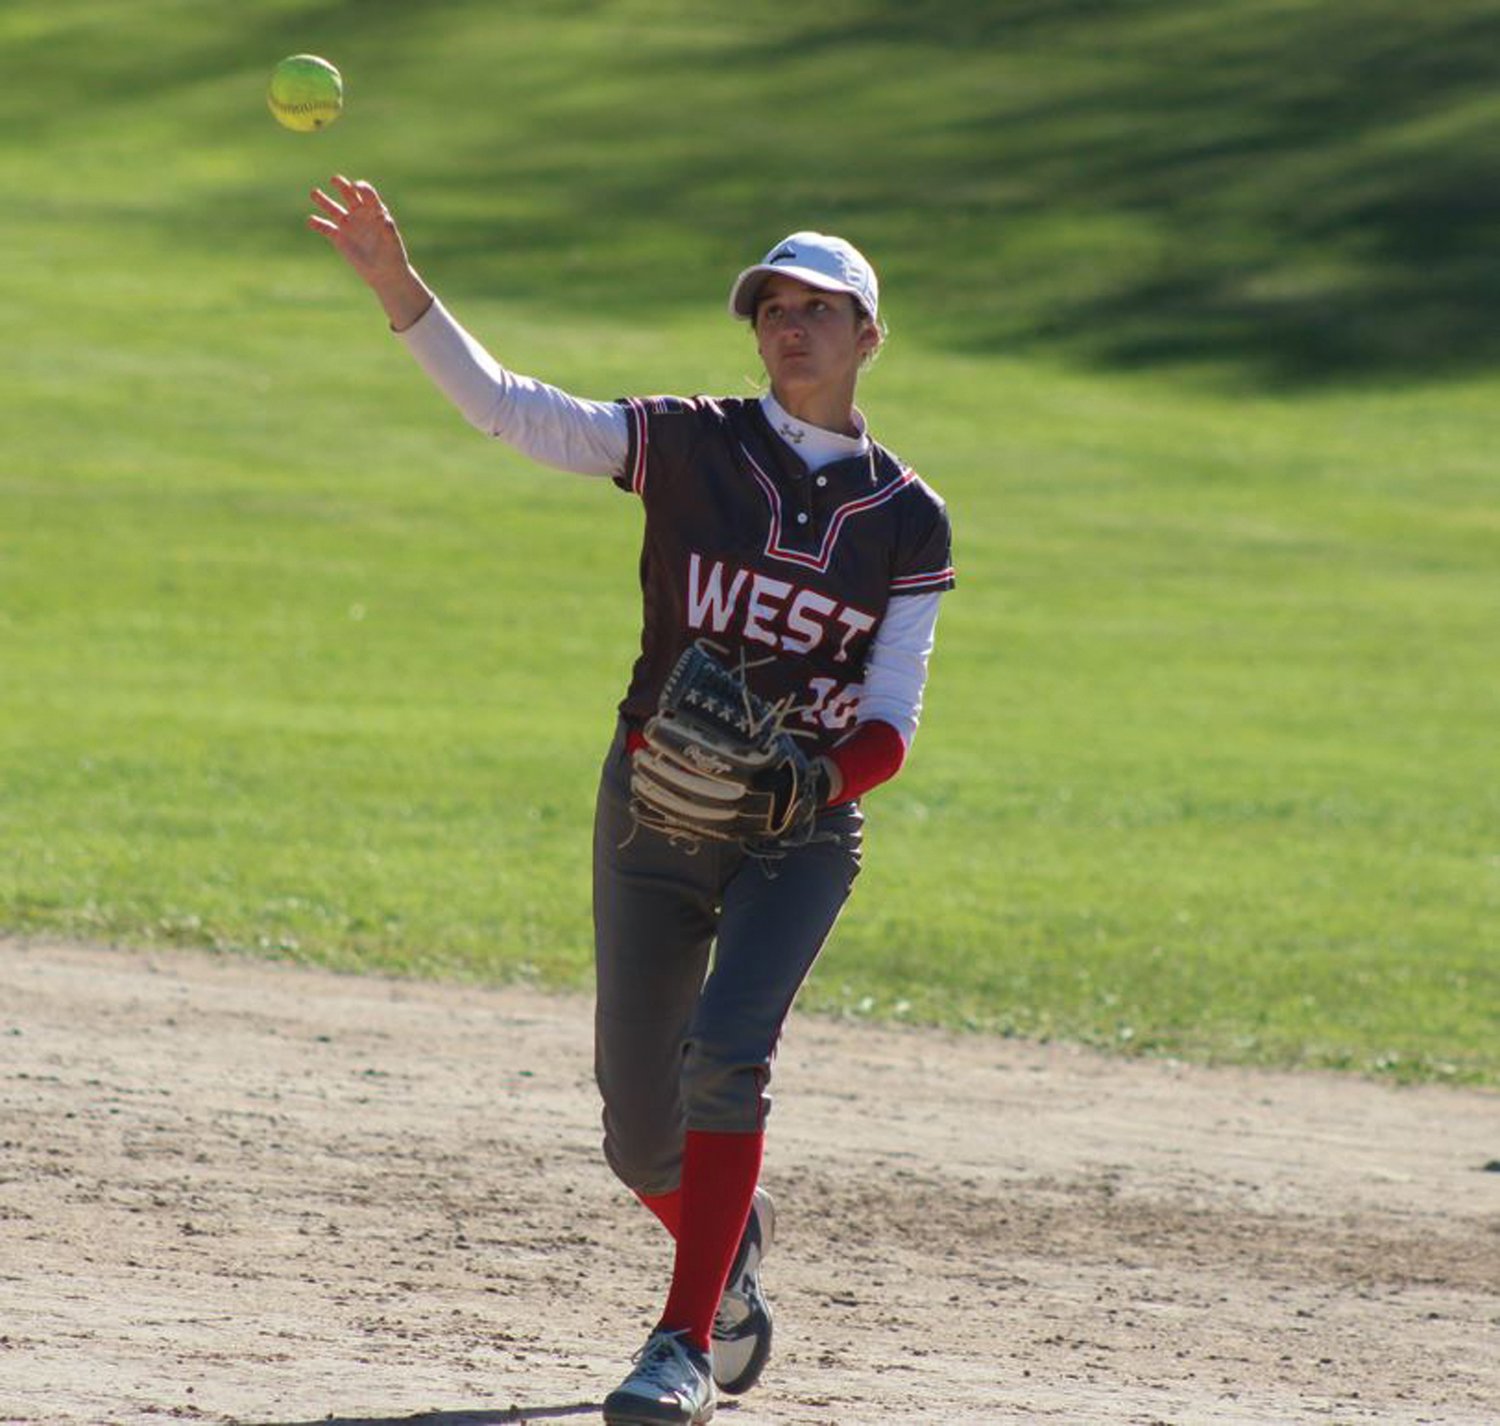 MAKING THE PLAY: Sophia Crudale makes a play to first base.